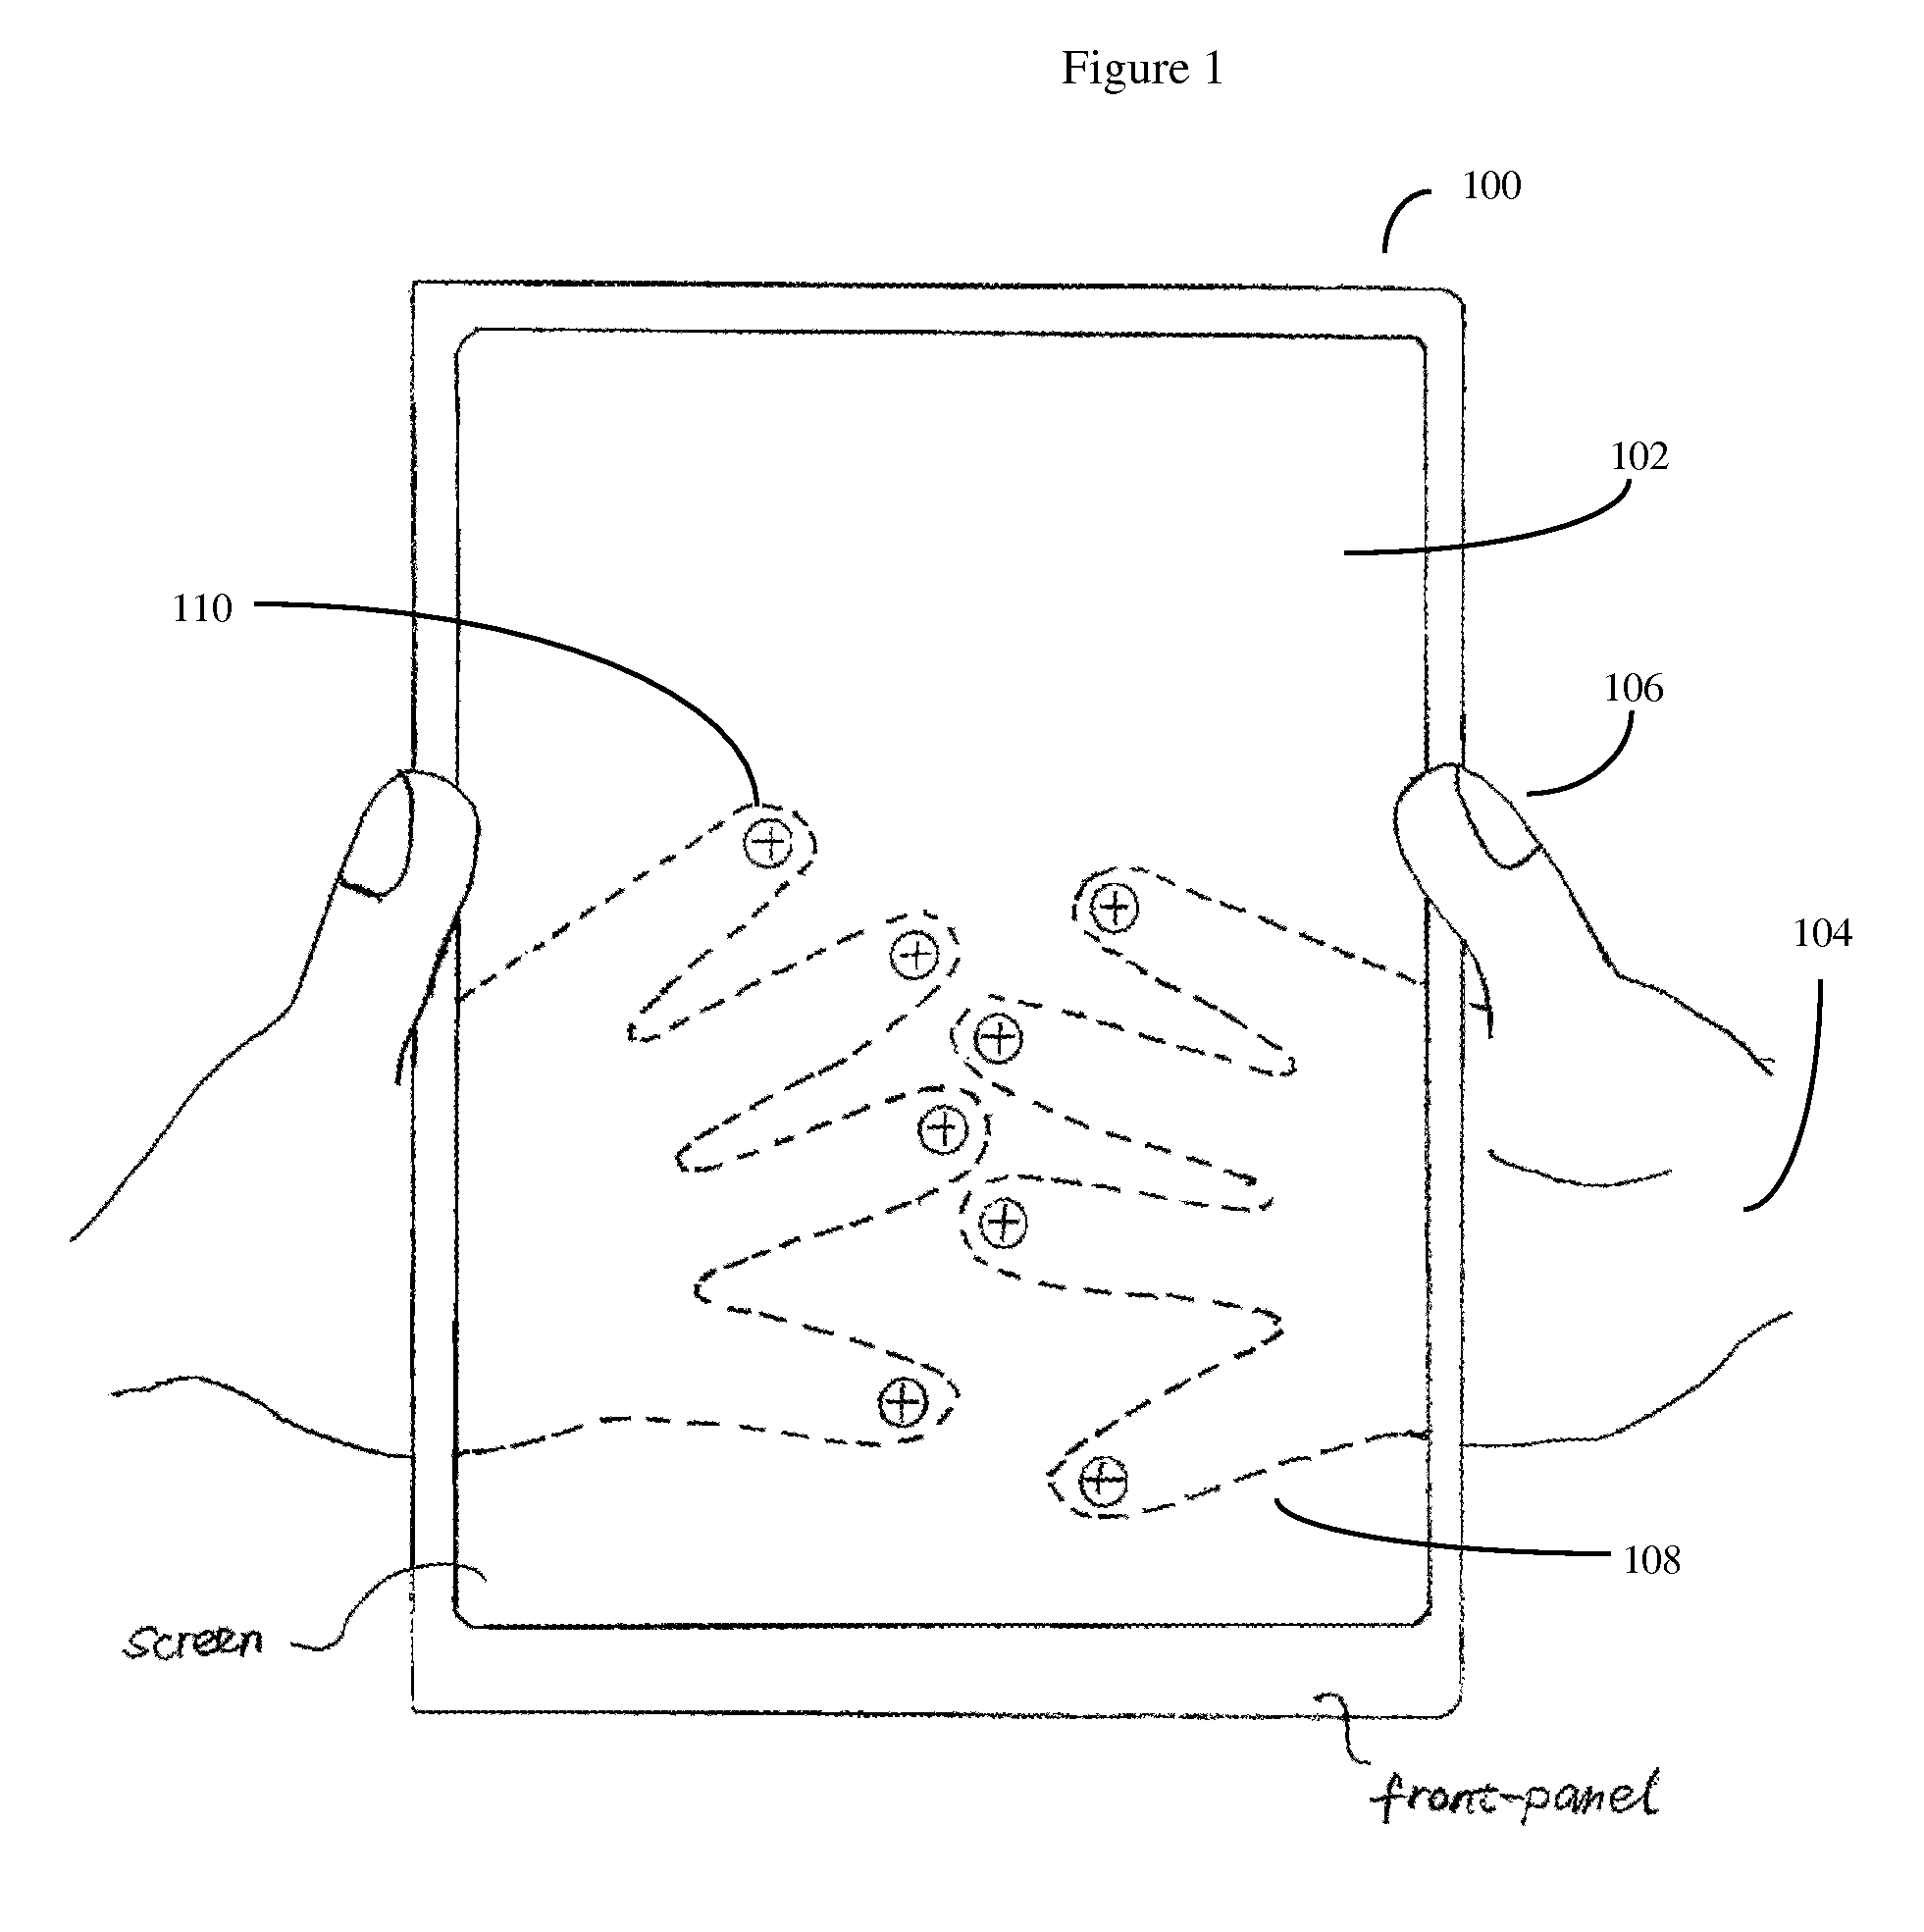 Method for user input from the back panel of a handheld computerized device